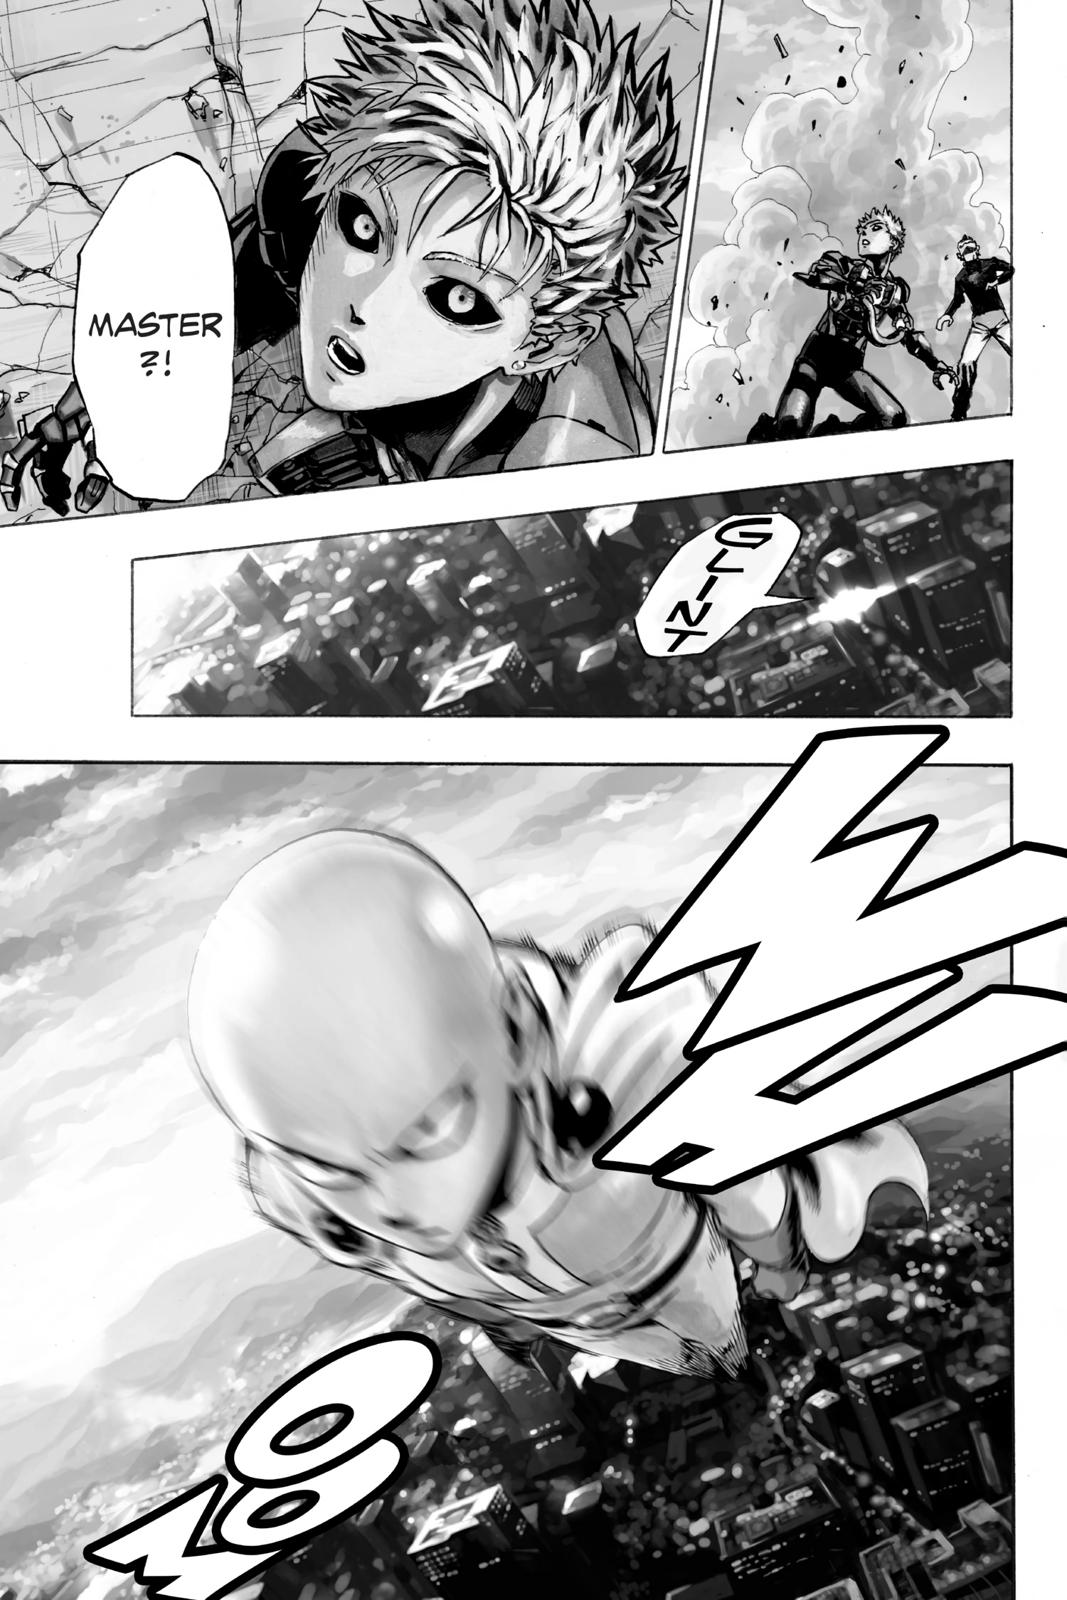 One-Punch Man, Punch 21 image 59